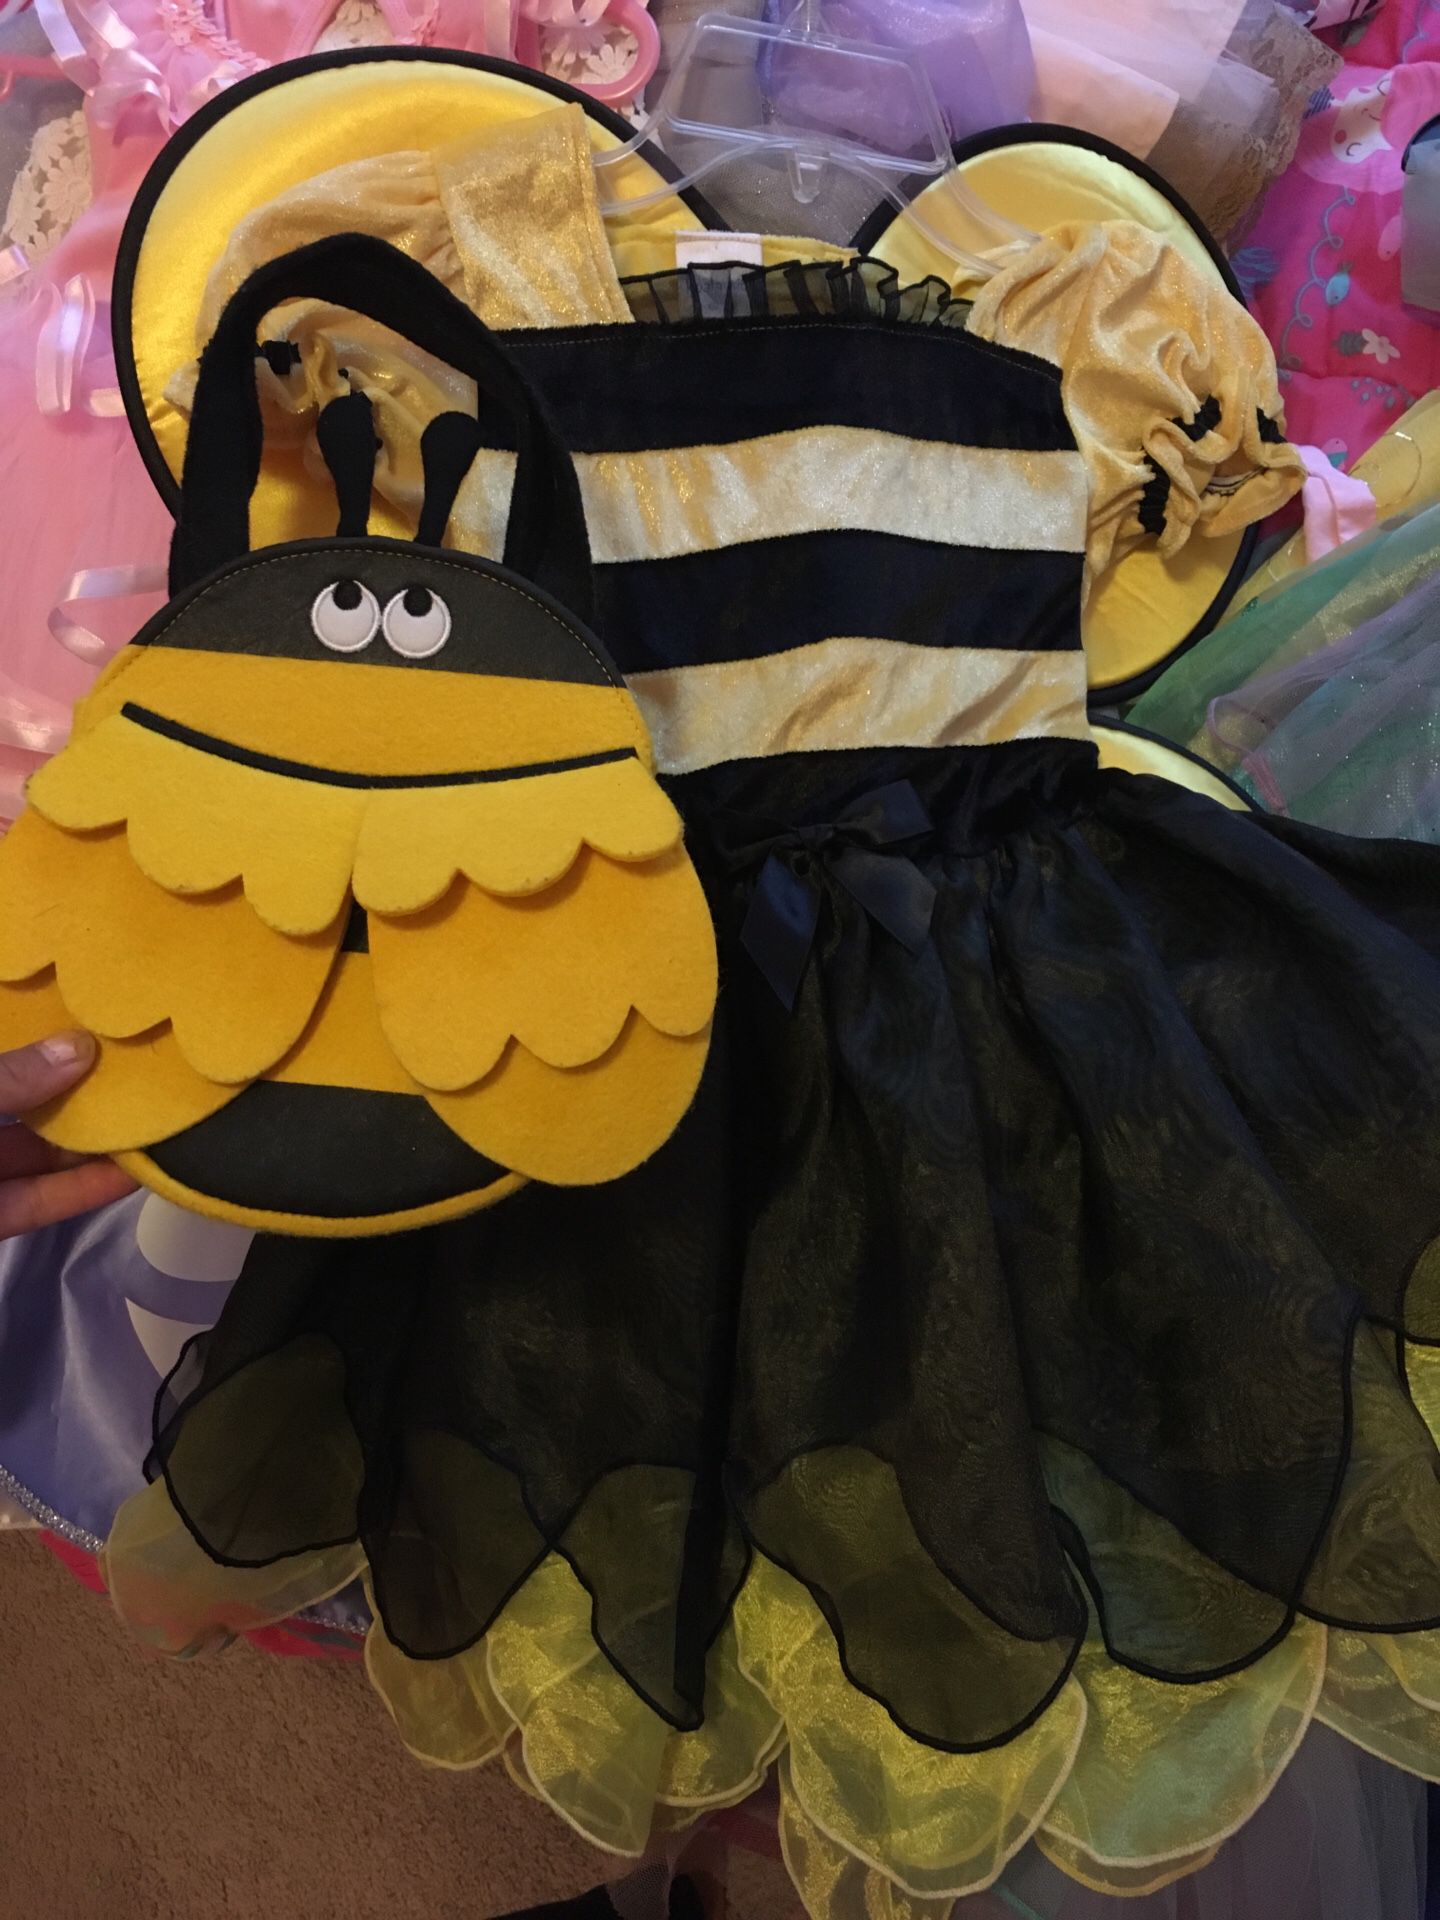 Bumble Bee costume comes w cute bag size 5t